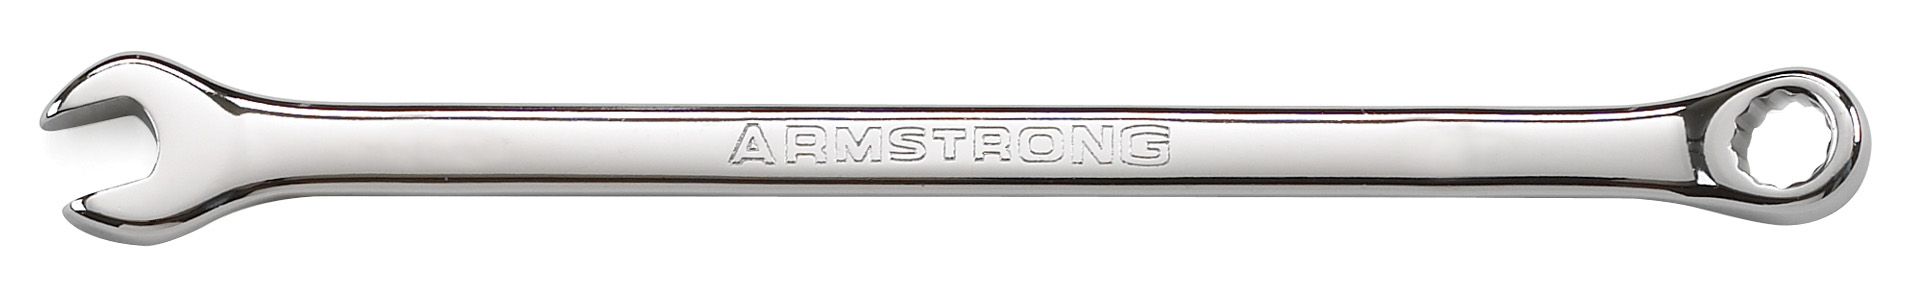 Armstrong 18 mm 12 pt. Full Polish Long Combination Wrench